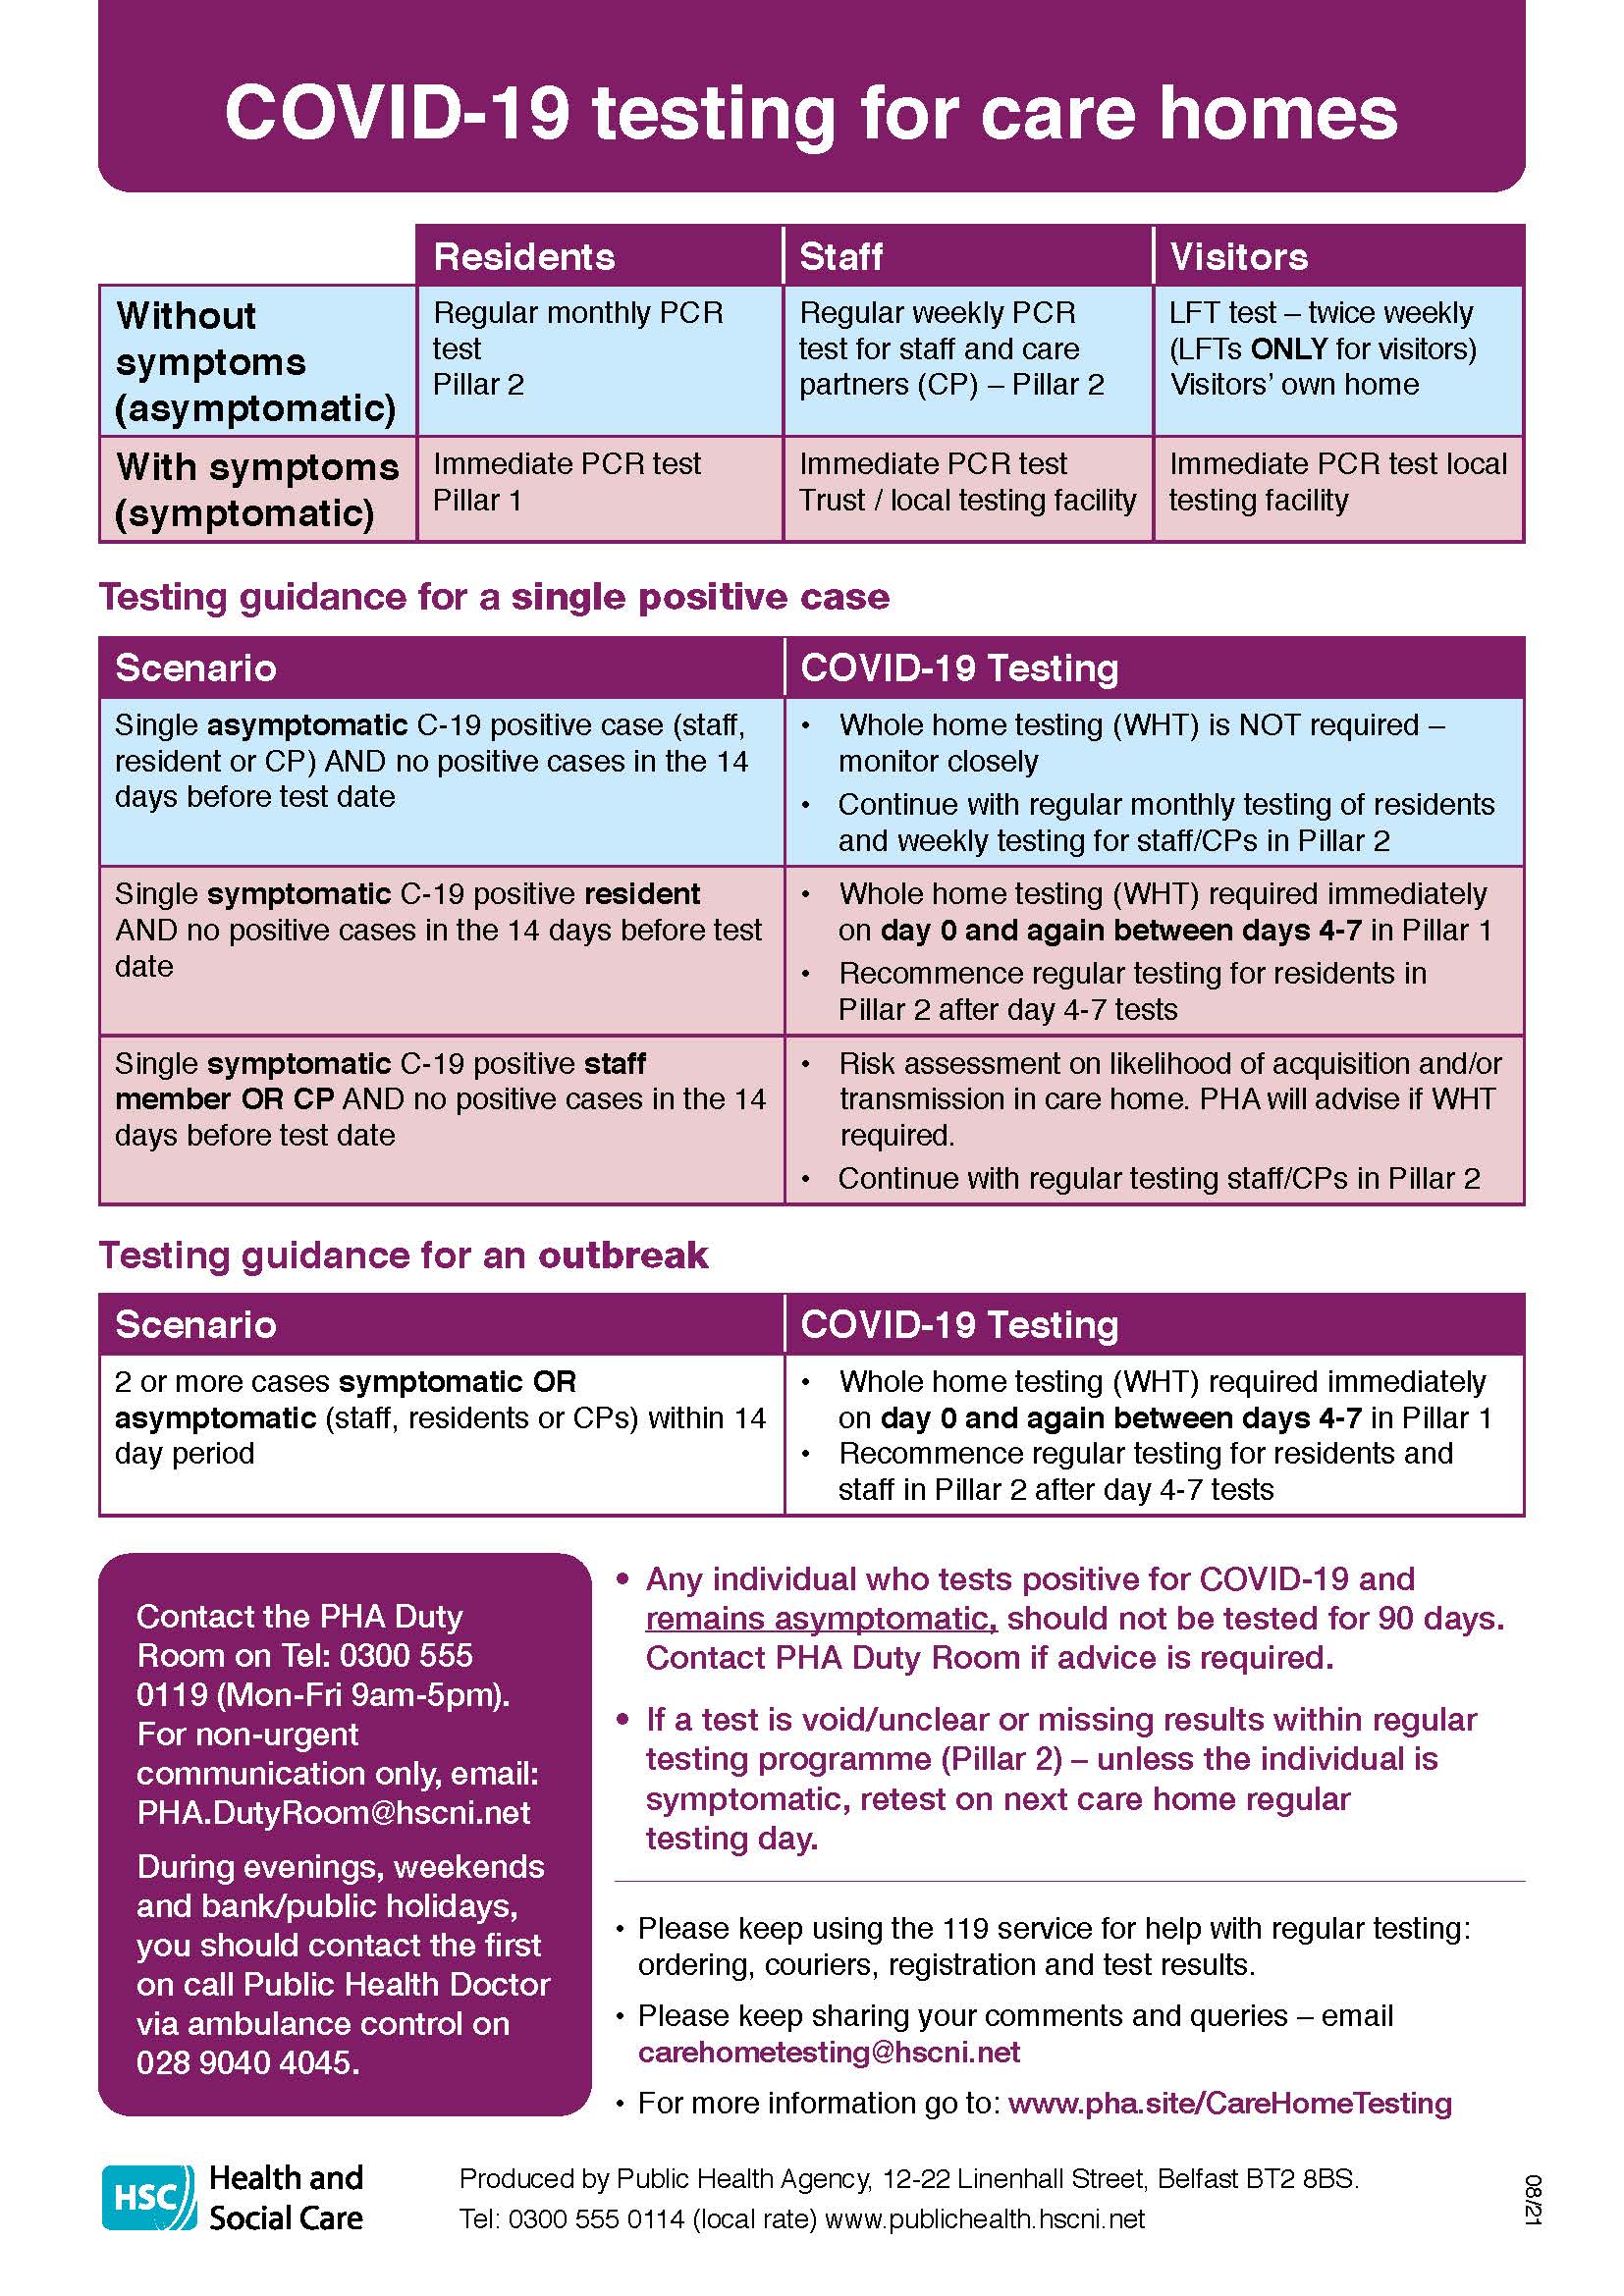 Image of care homes COVID testing poster